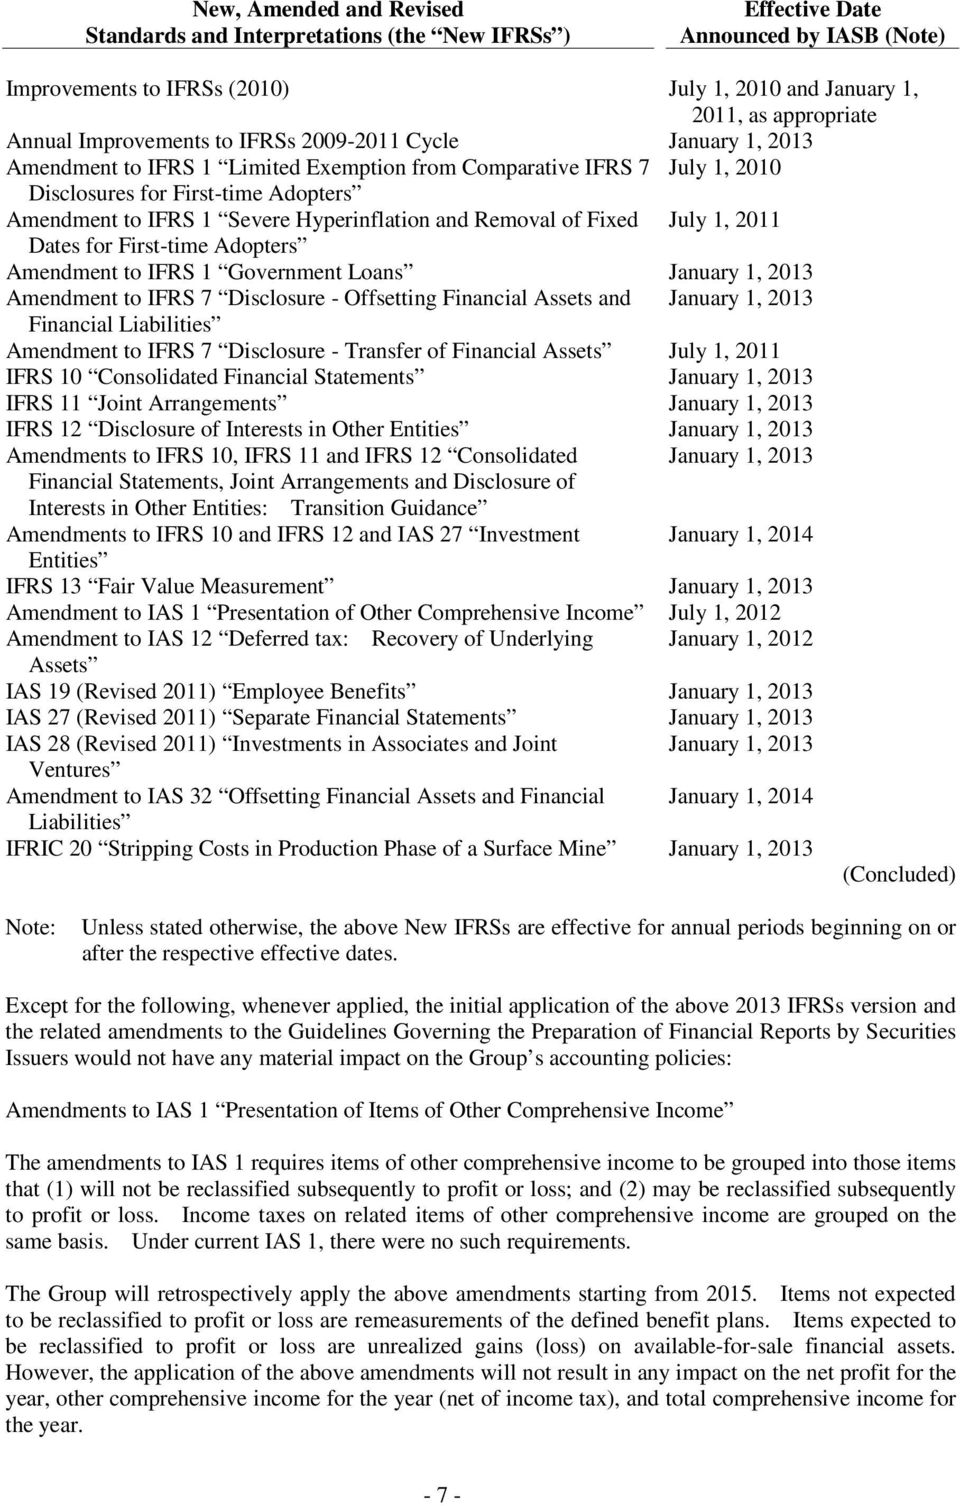 Hyperinflation and Removal of Fixed July 1, 2011 Dates for First-time Adopters Amendment to IFRS 1 Government Loans January 1, 2013 Amendment to IFRS 7 Disclosure - Offsetting Financial Assets and